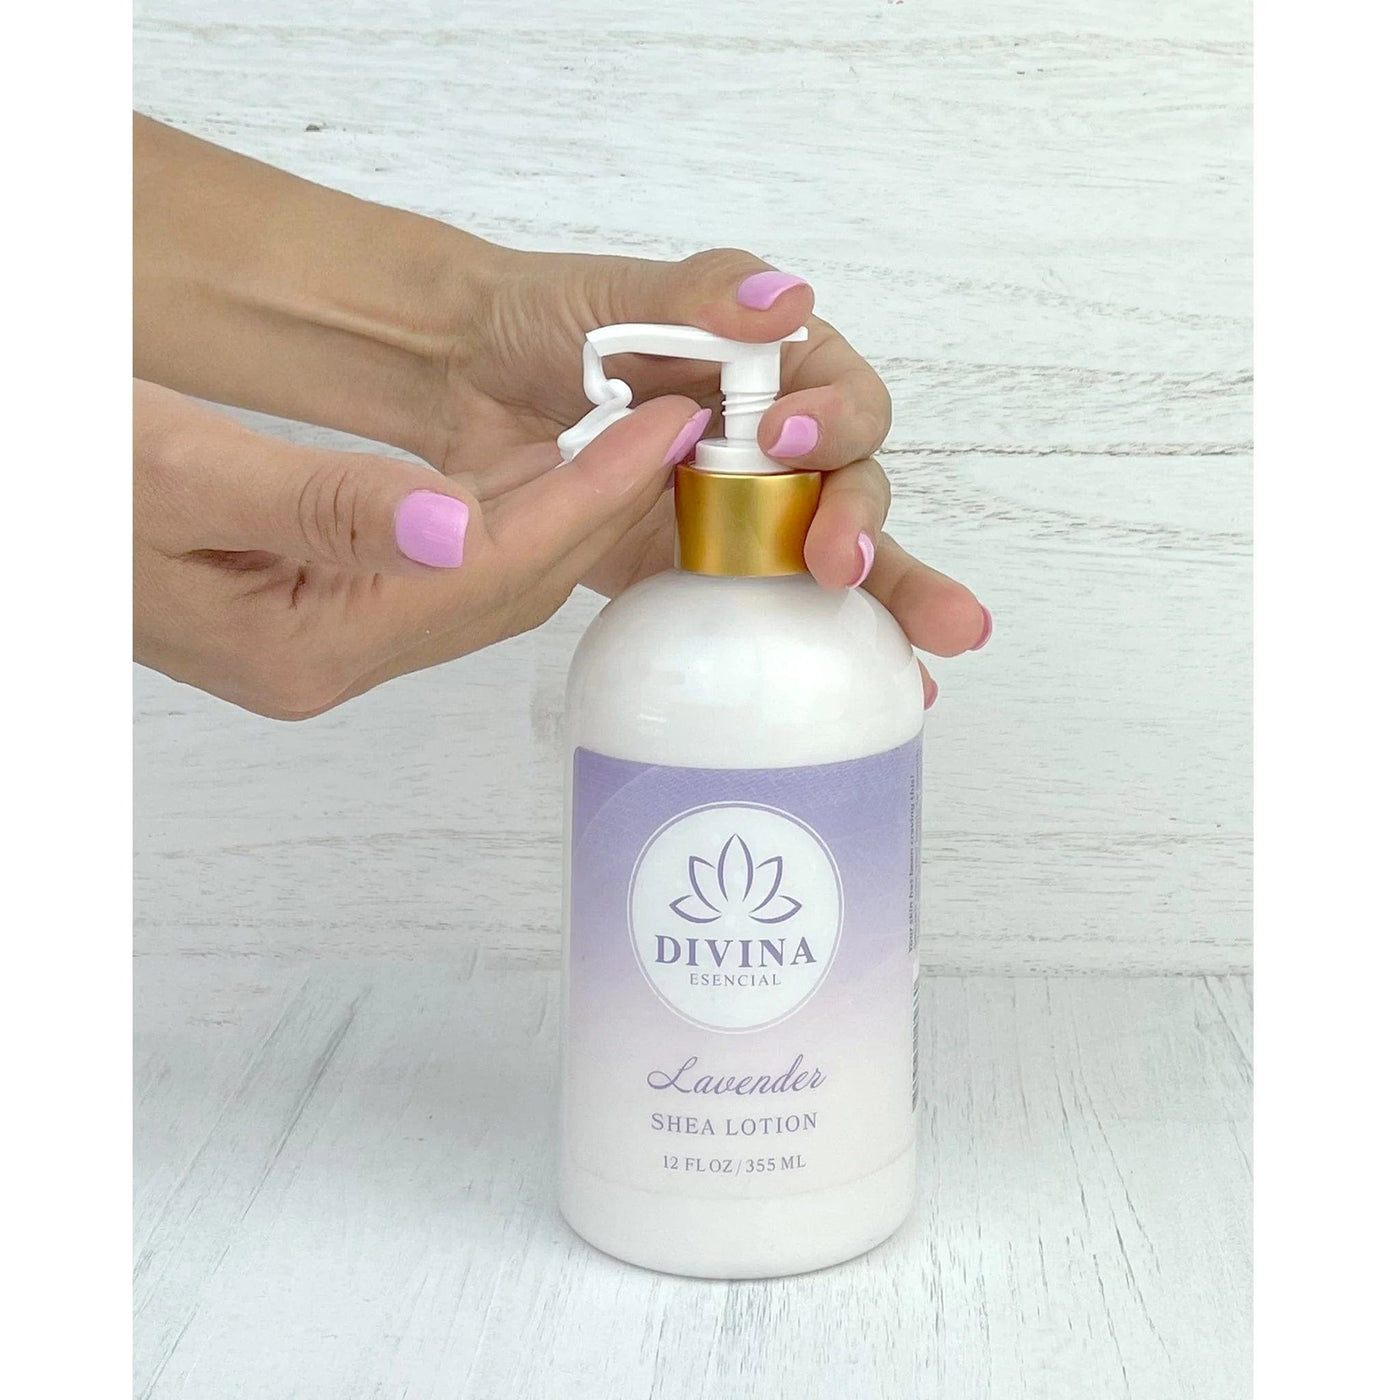 Divina Esencial Hand Soap & Lotion - 2 Pack